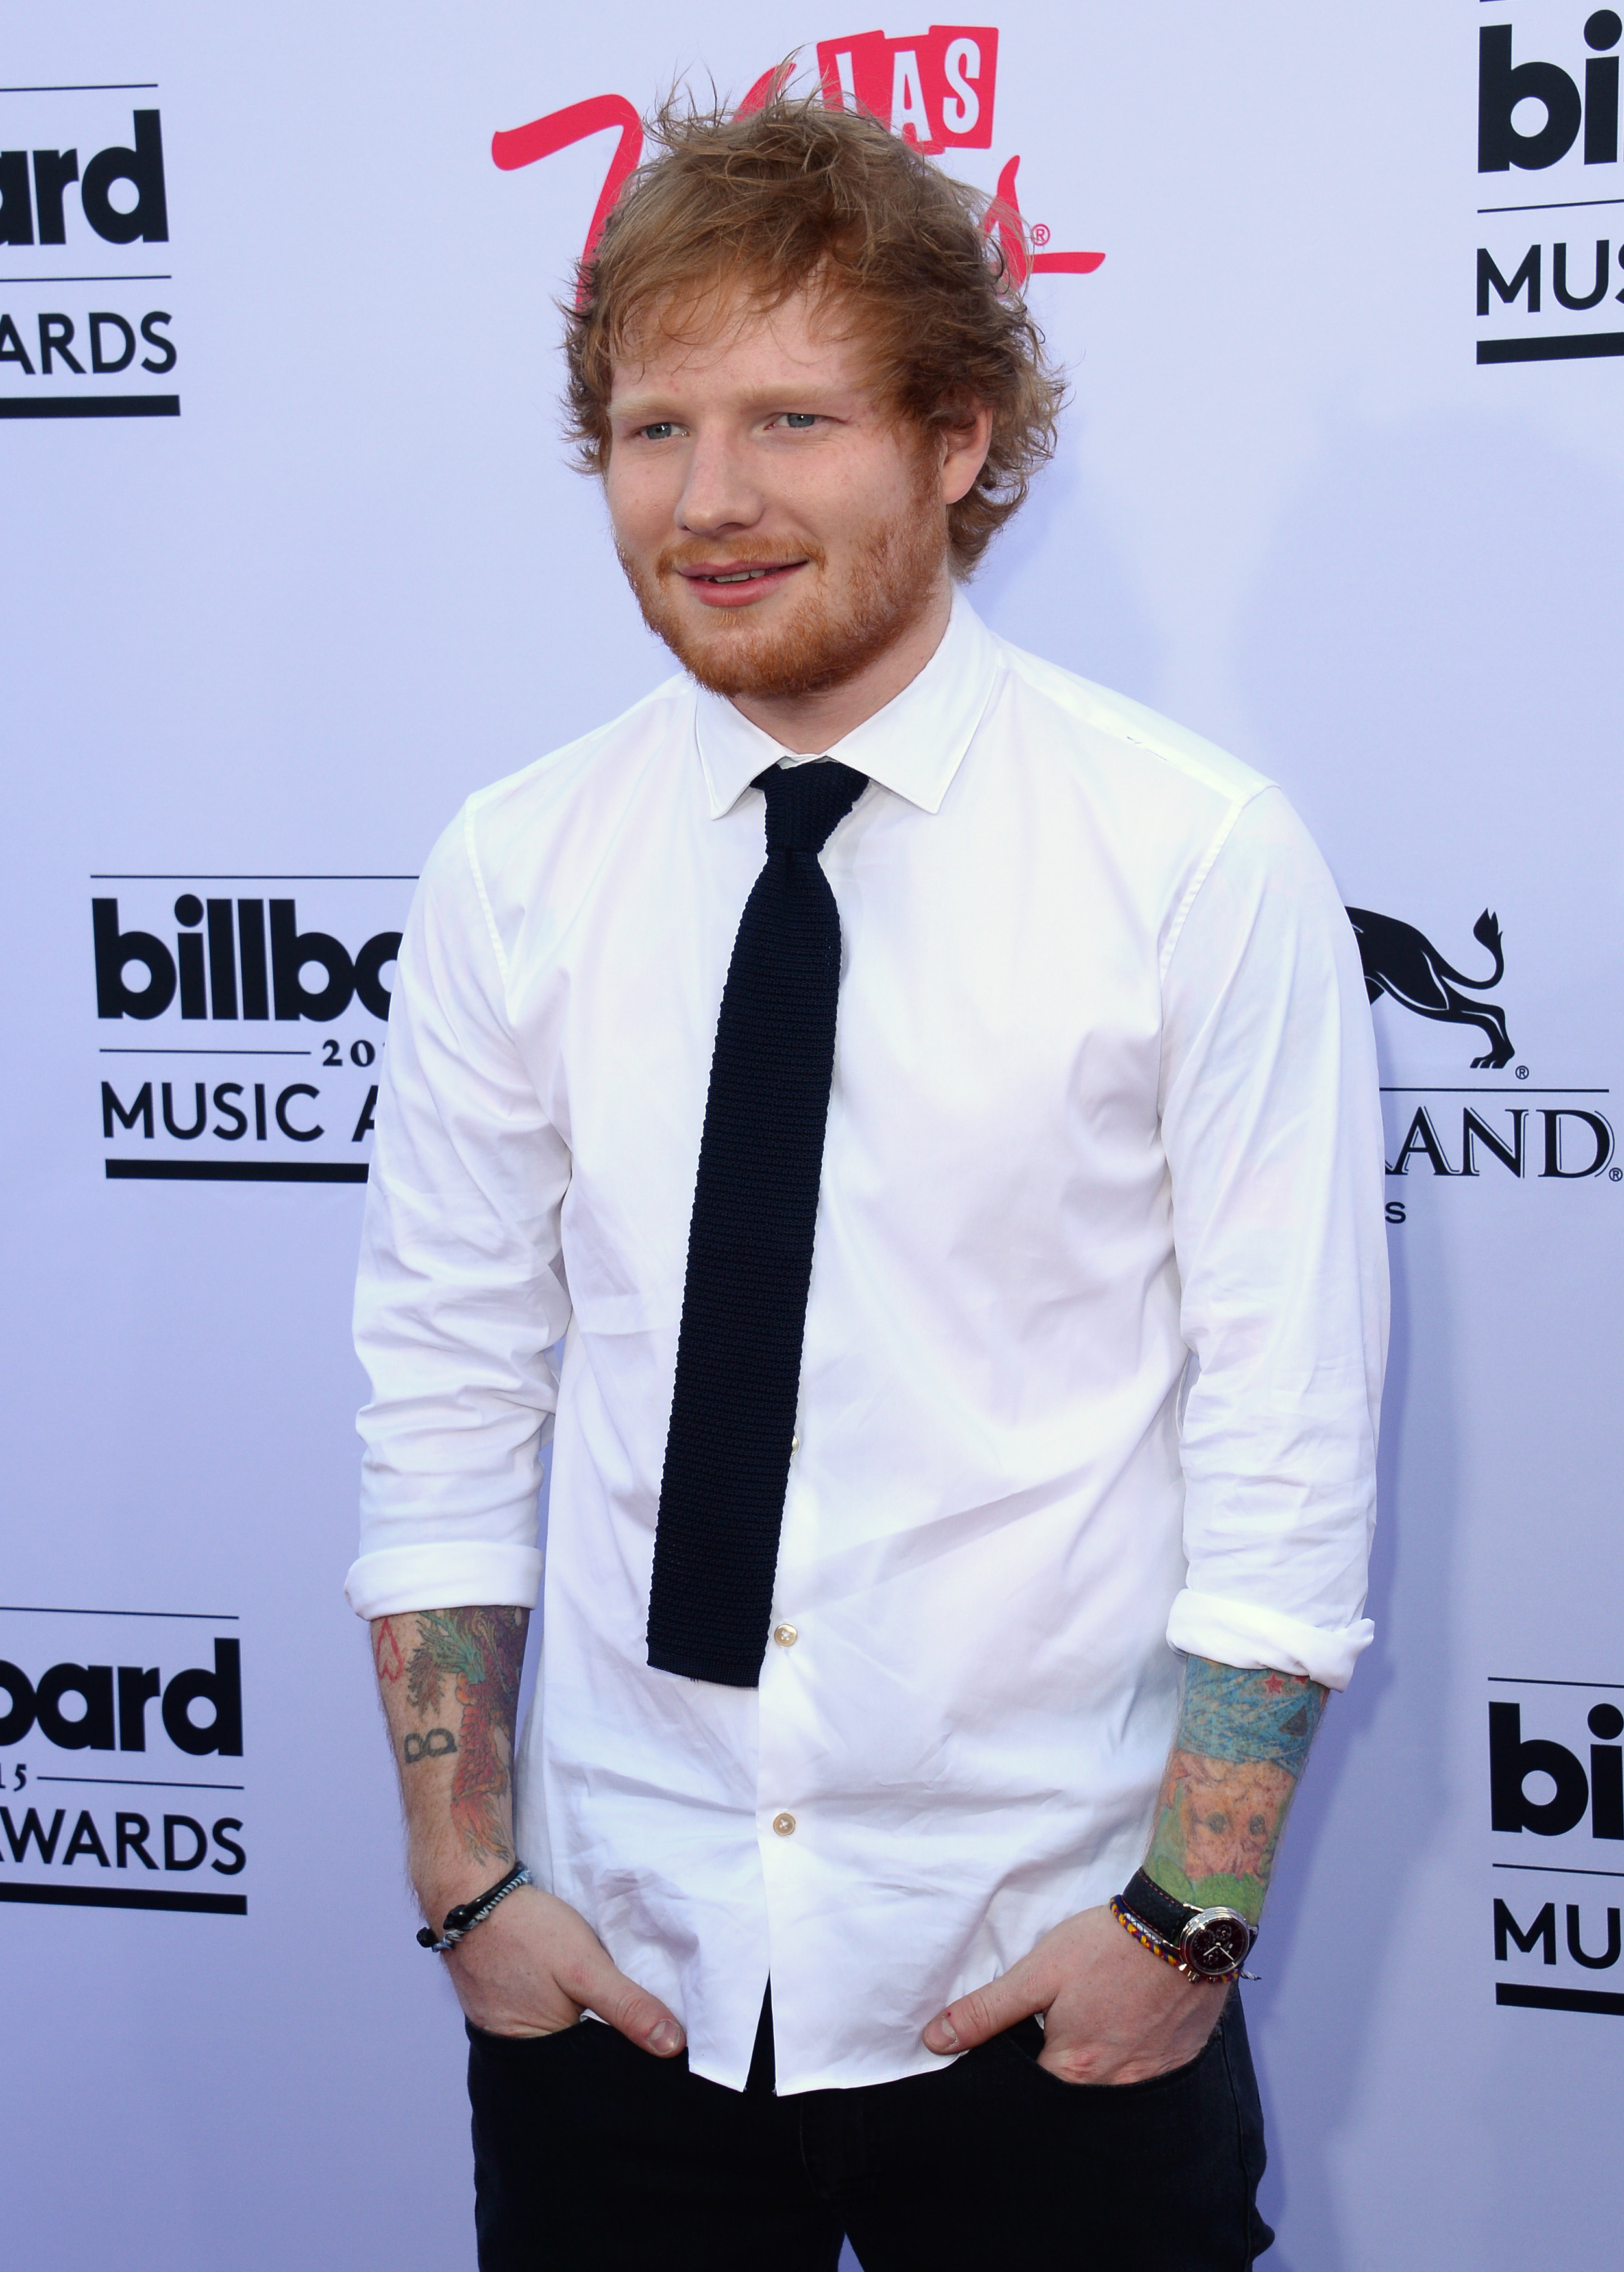 Ed Sheeran's Career Transformation Over the Years in Photos